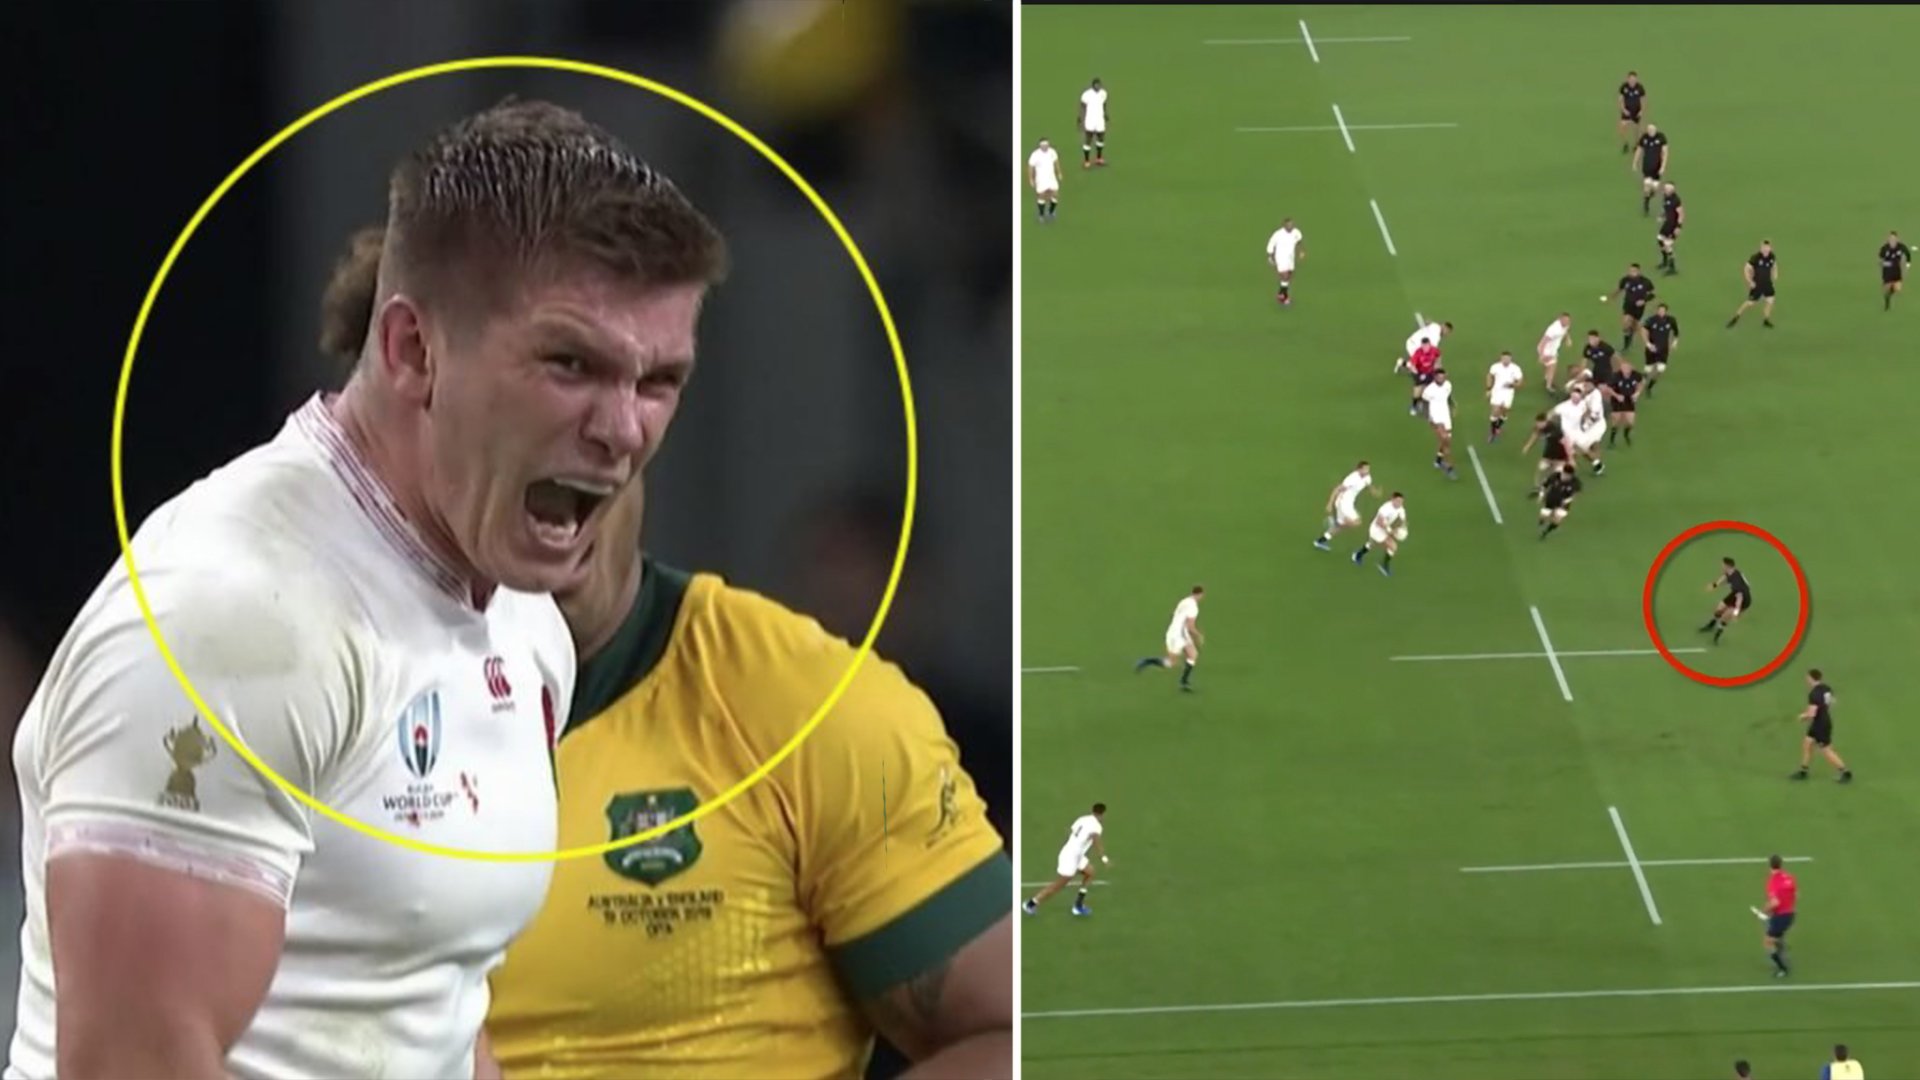 A rugby fan has brilliantly worked out how England dismantled New Zealand at the 2019 Rugby World Cup